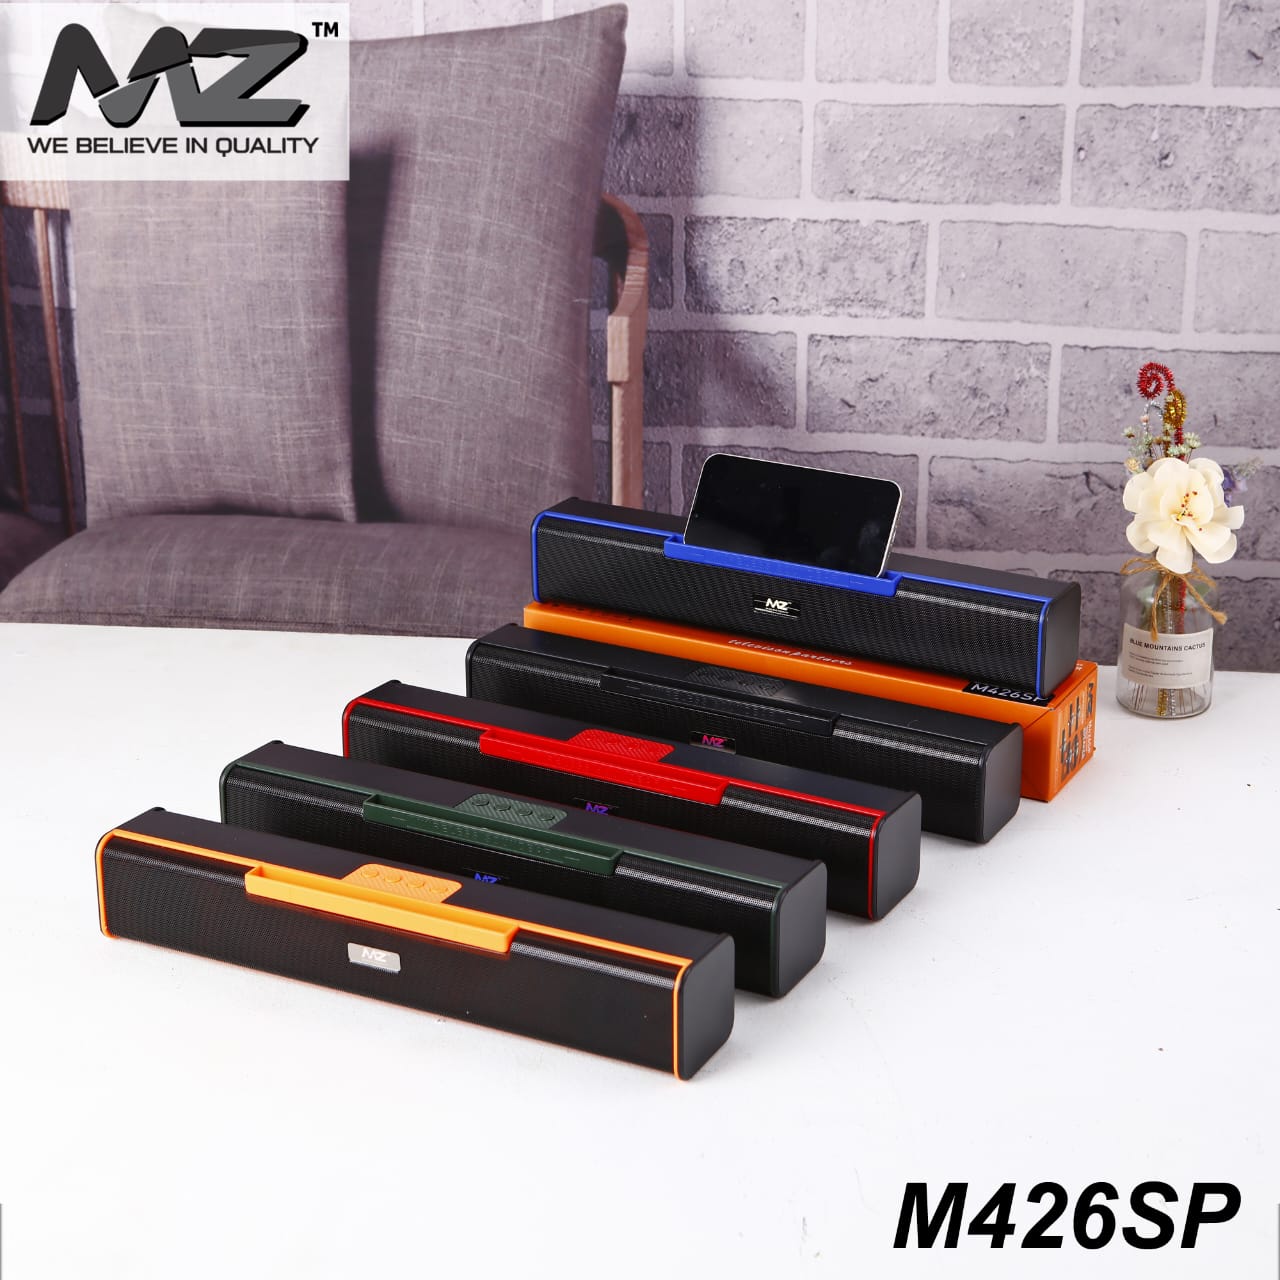 MZ M426SP Speaker, Dynamic Thunder Sound 2400mAh Battery 10 W Bluetooth Sound bar (Multicolor, Stereo Channel)